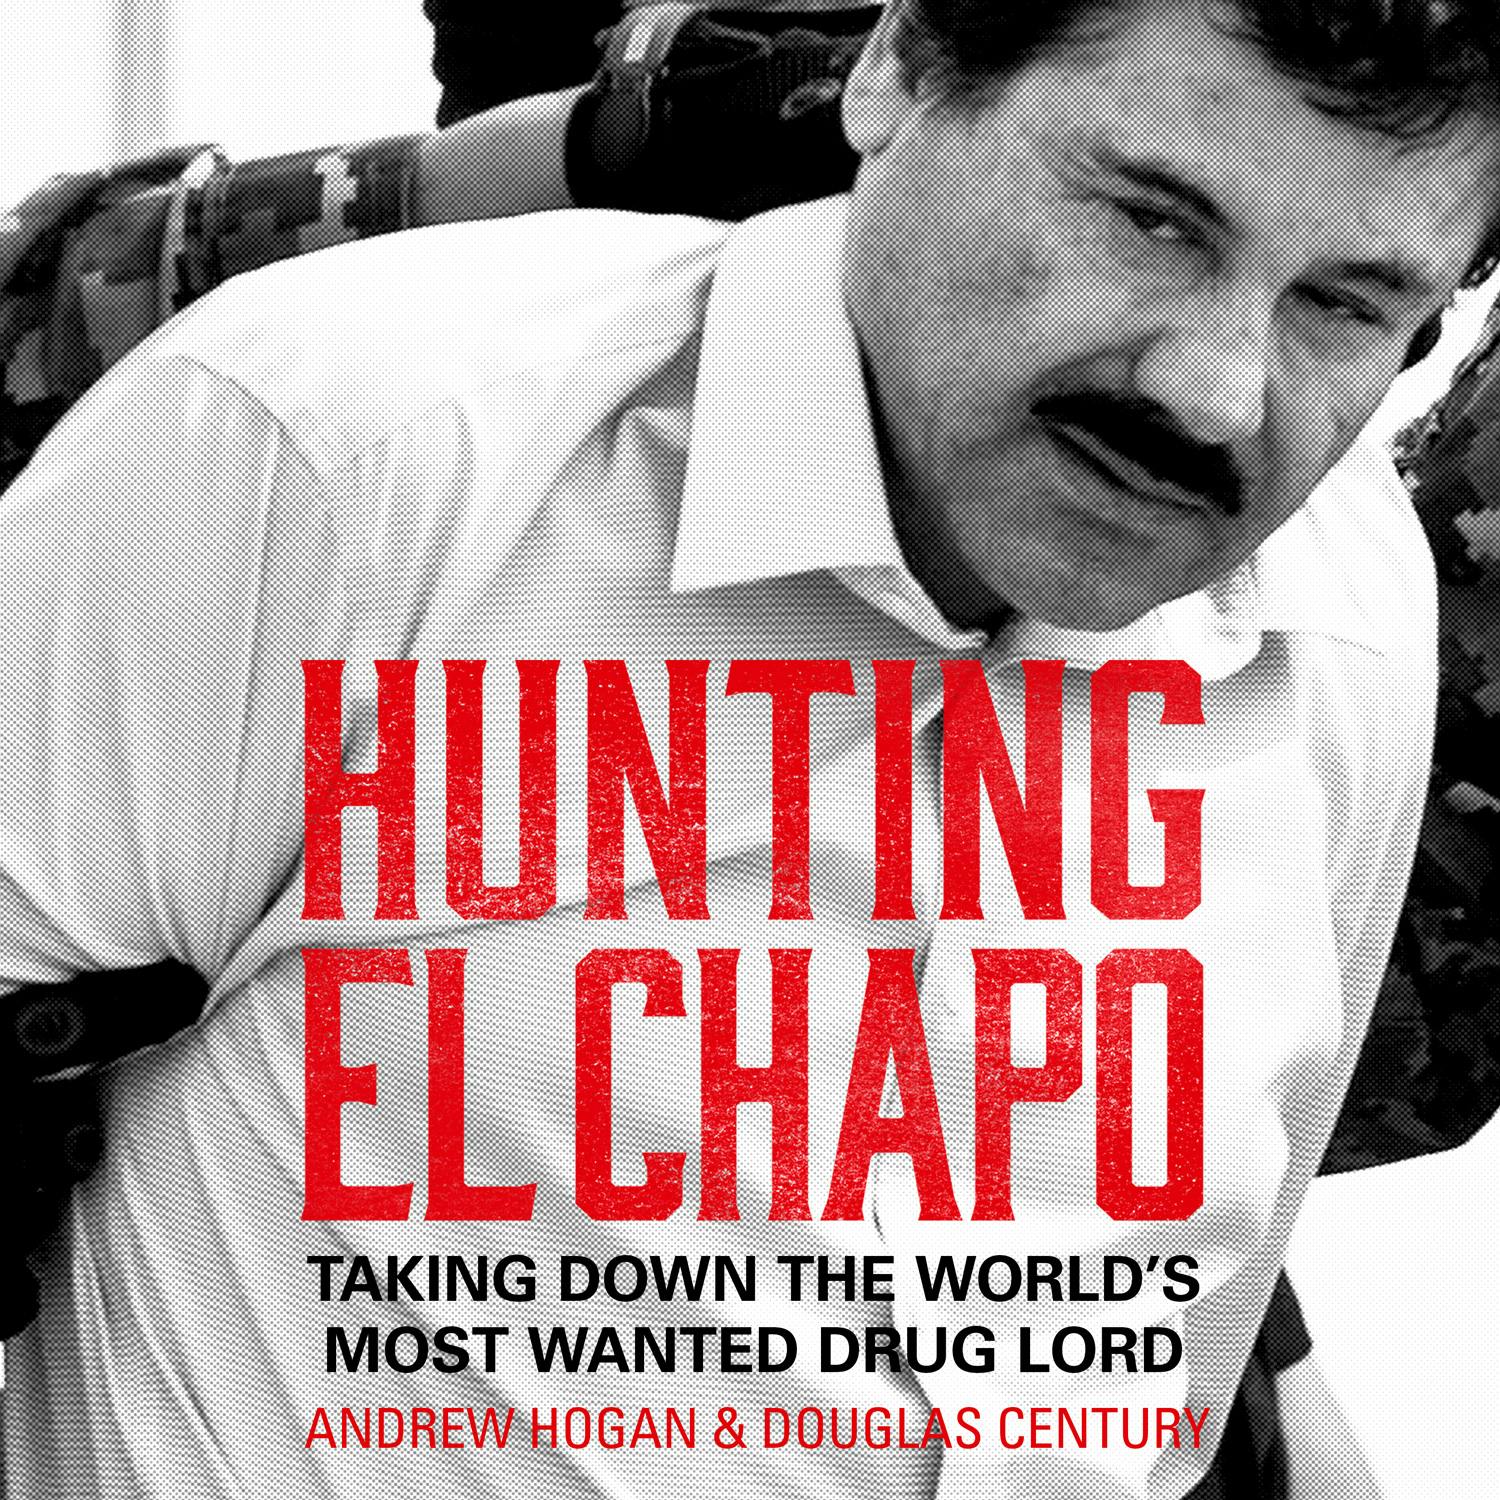 Hunting El Chapo: Taking down the world’s most-wanted drug-lord - Andrew Hogan, Douglas Century